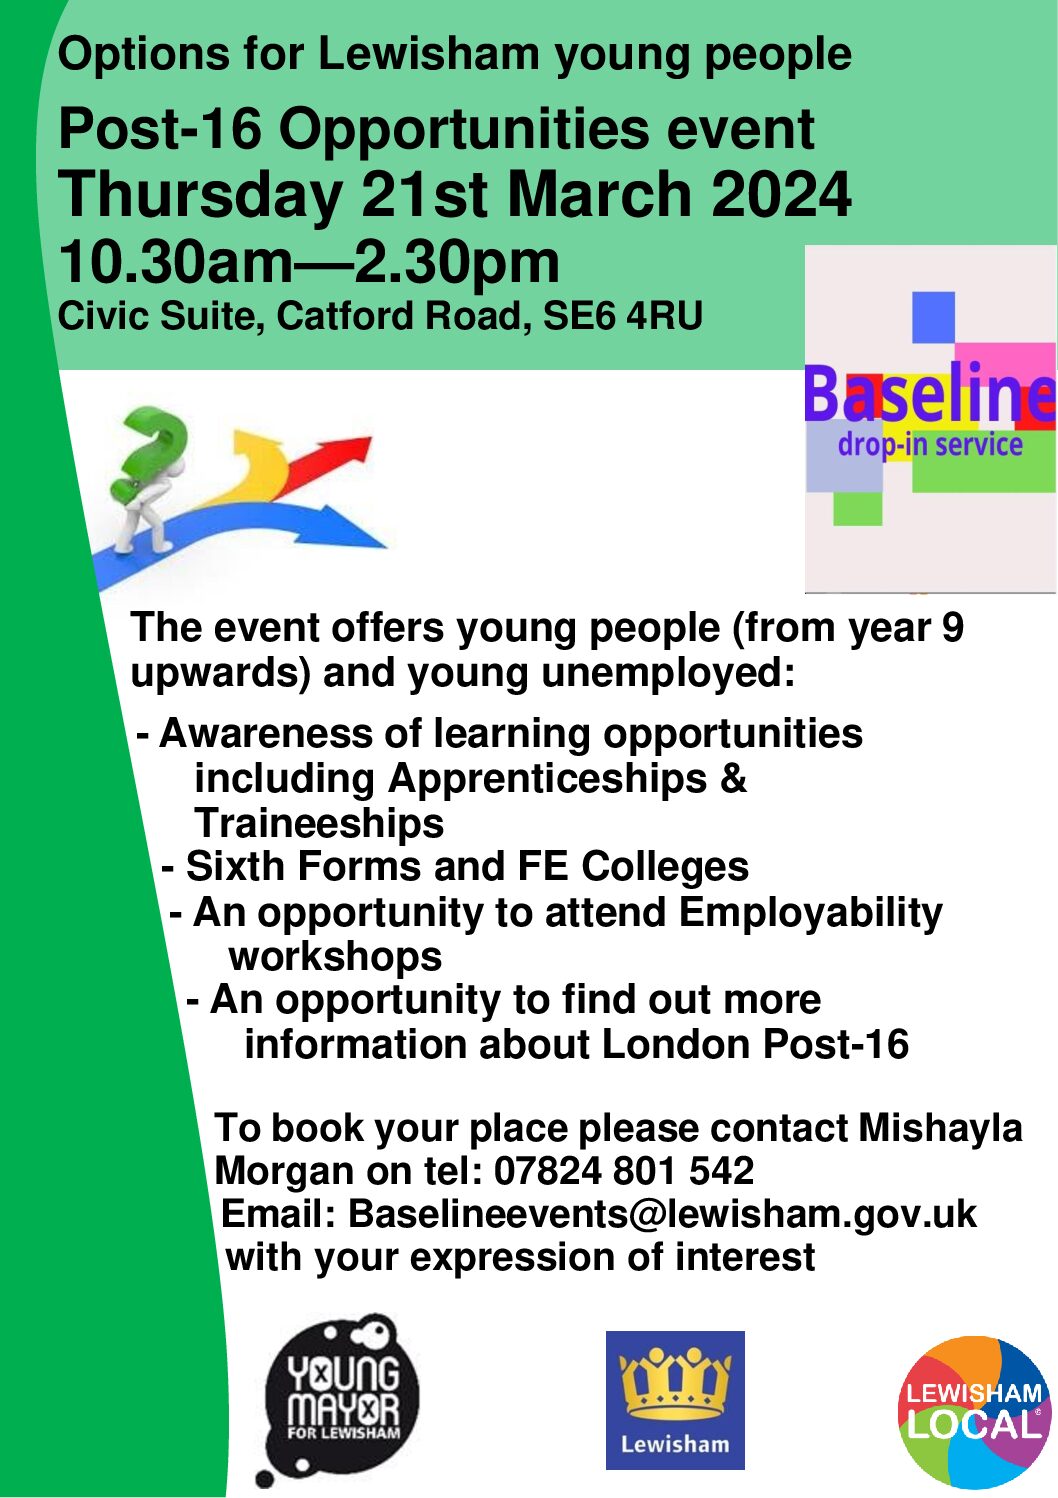 Post-16 Opportunities event Thursday 21st March 2024 10.30am—2.30pm